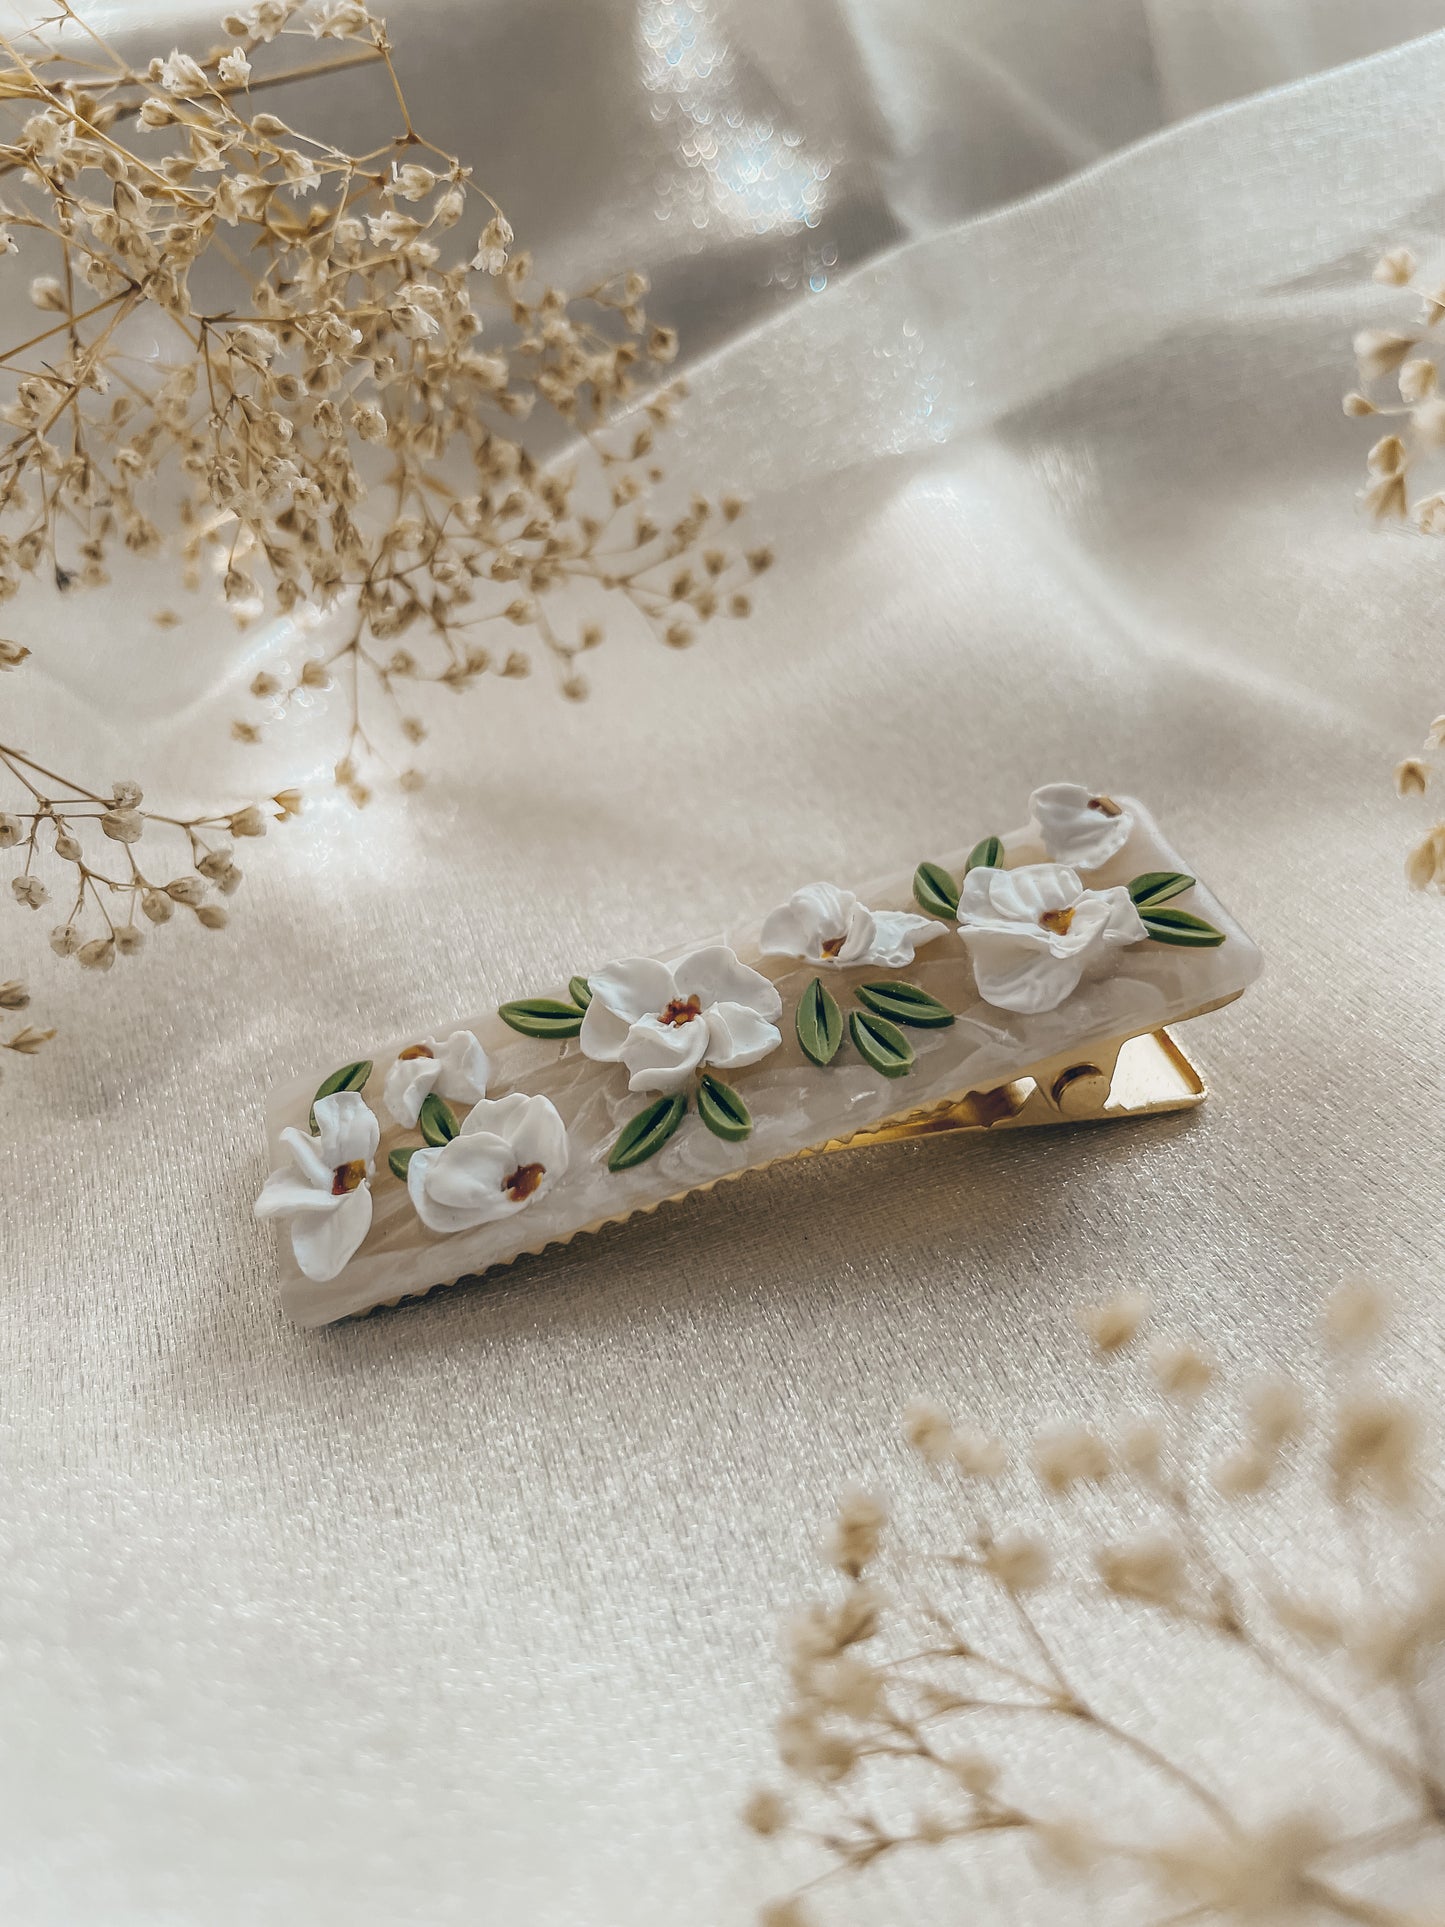 The Painted Florals Hair Barrette